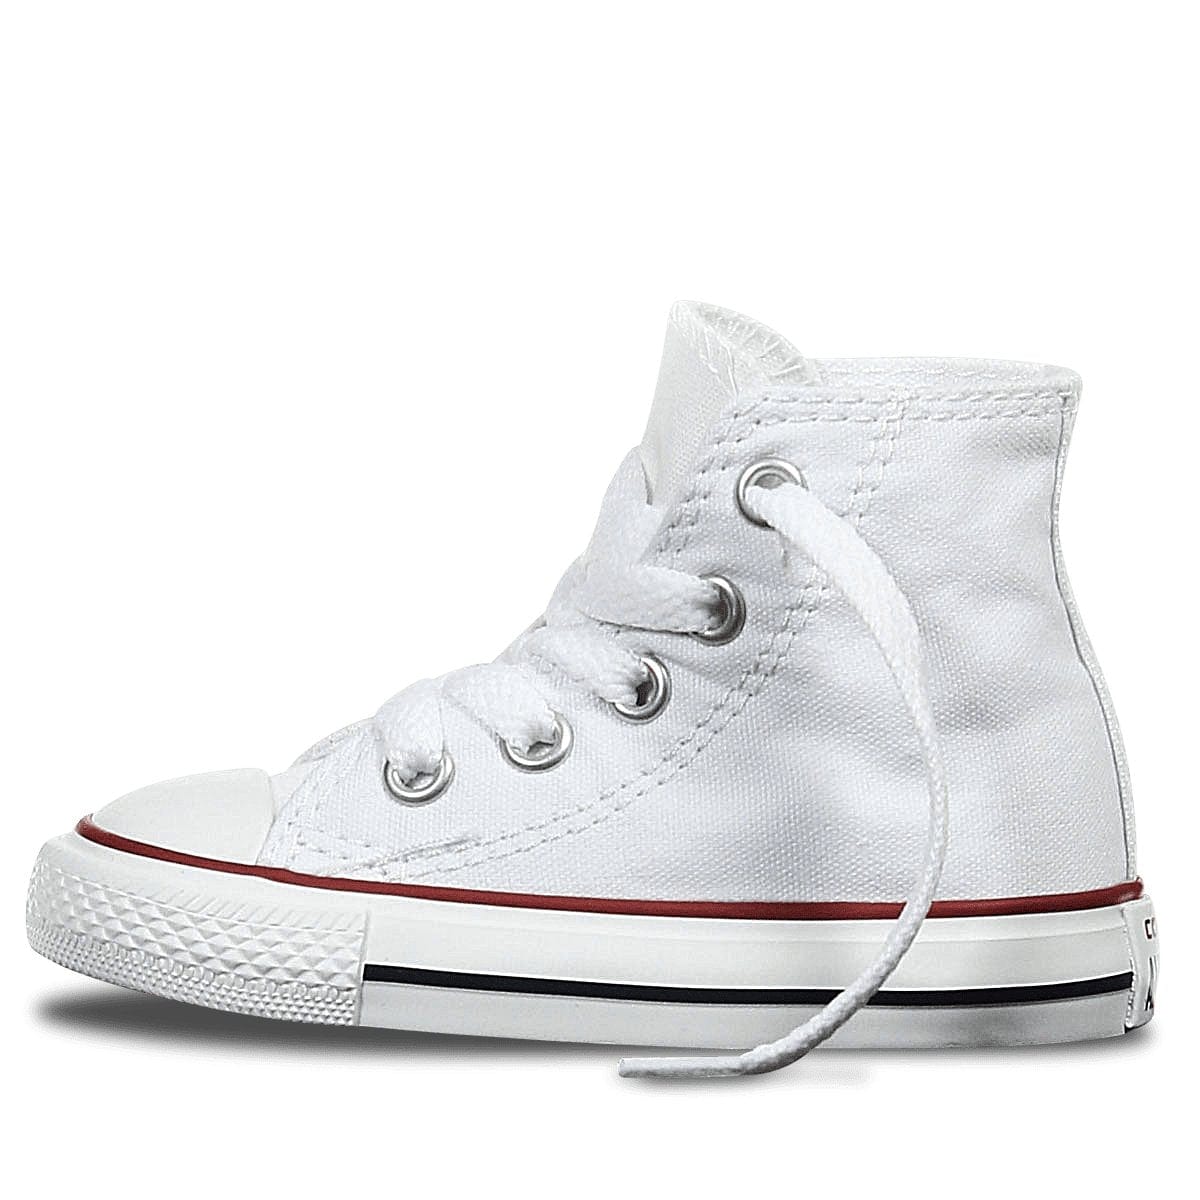 Converse CONVERSE INFANT'S CHUCK TAYLOR ALL STARS HIGH TOP WHITE SHOE - INSPORT